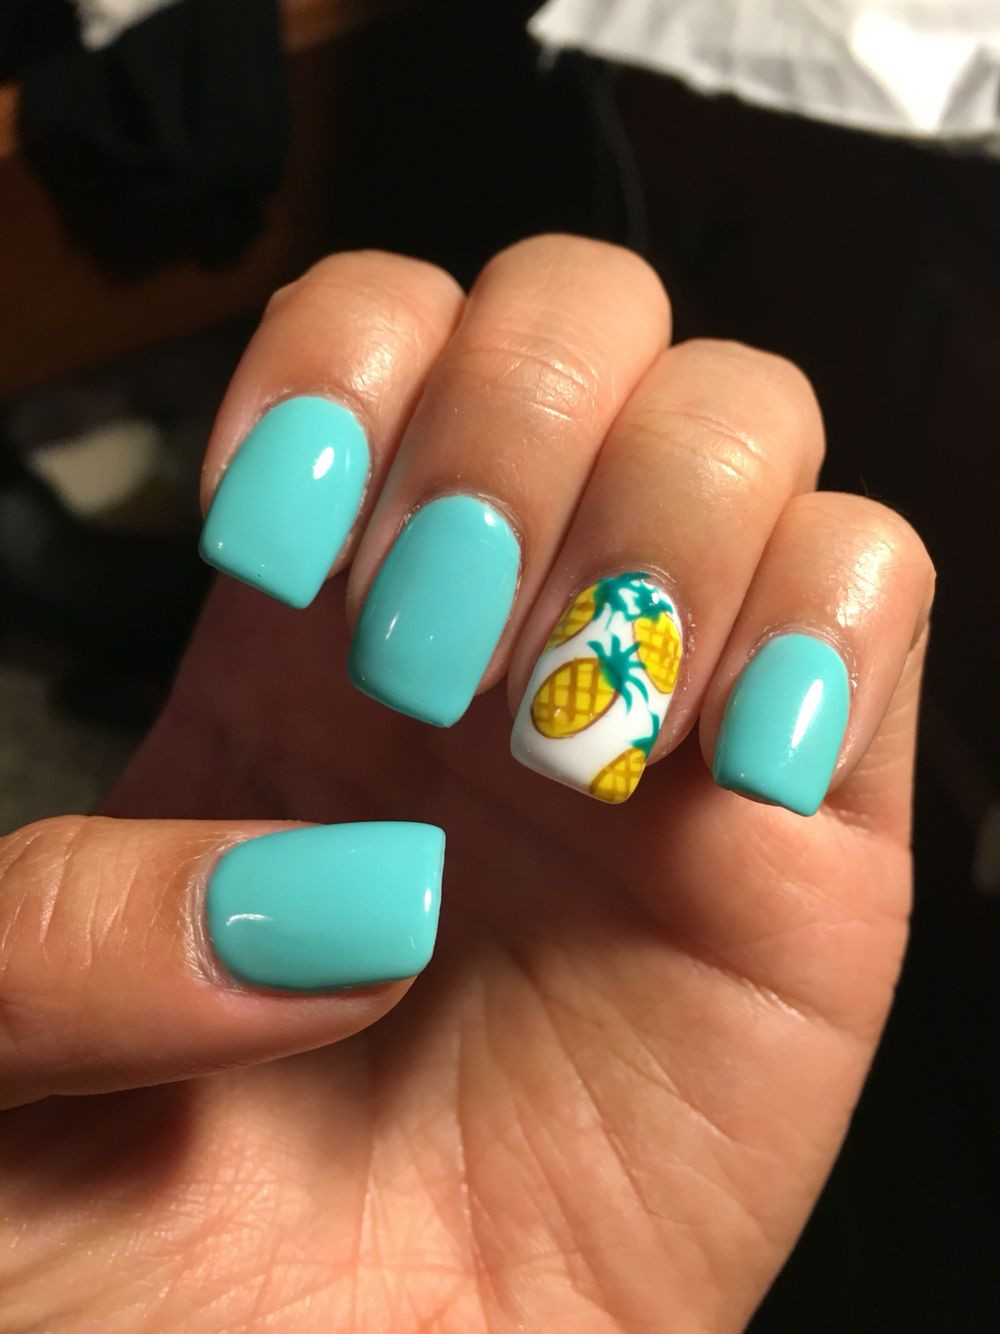 Summer Acrylic Nail Design
 Summer nails Teal acrylics with pineapples